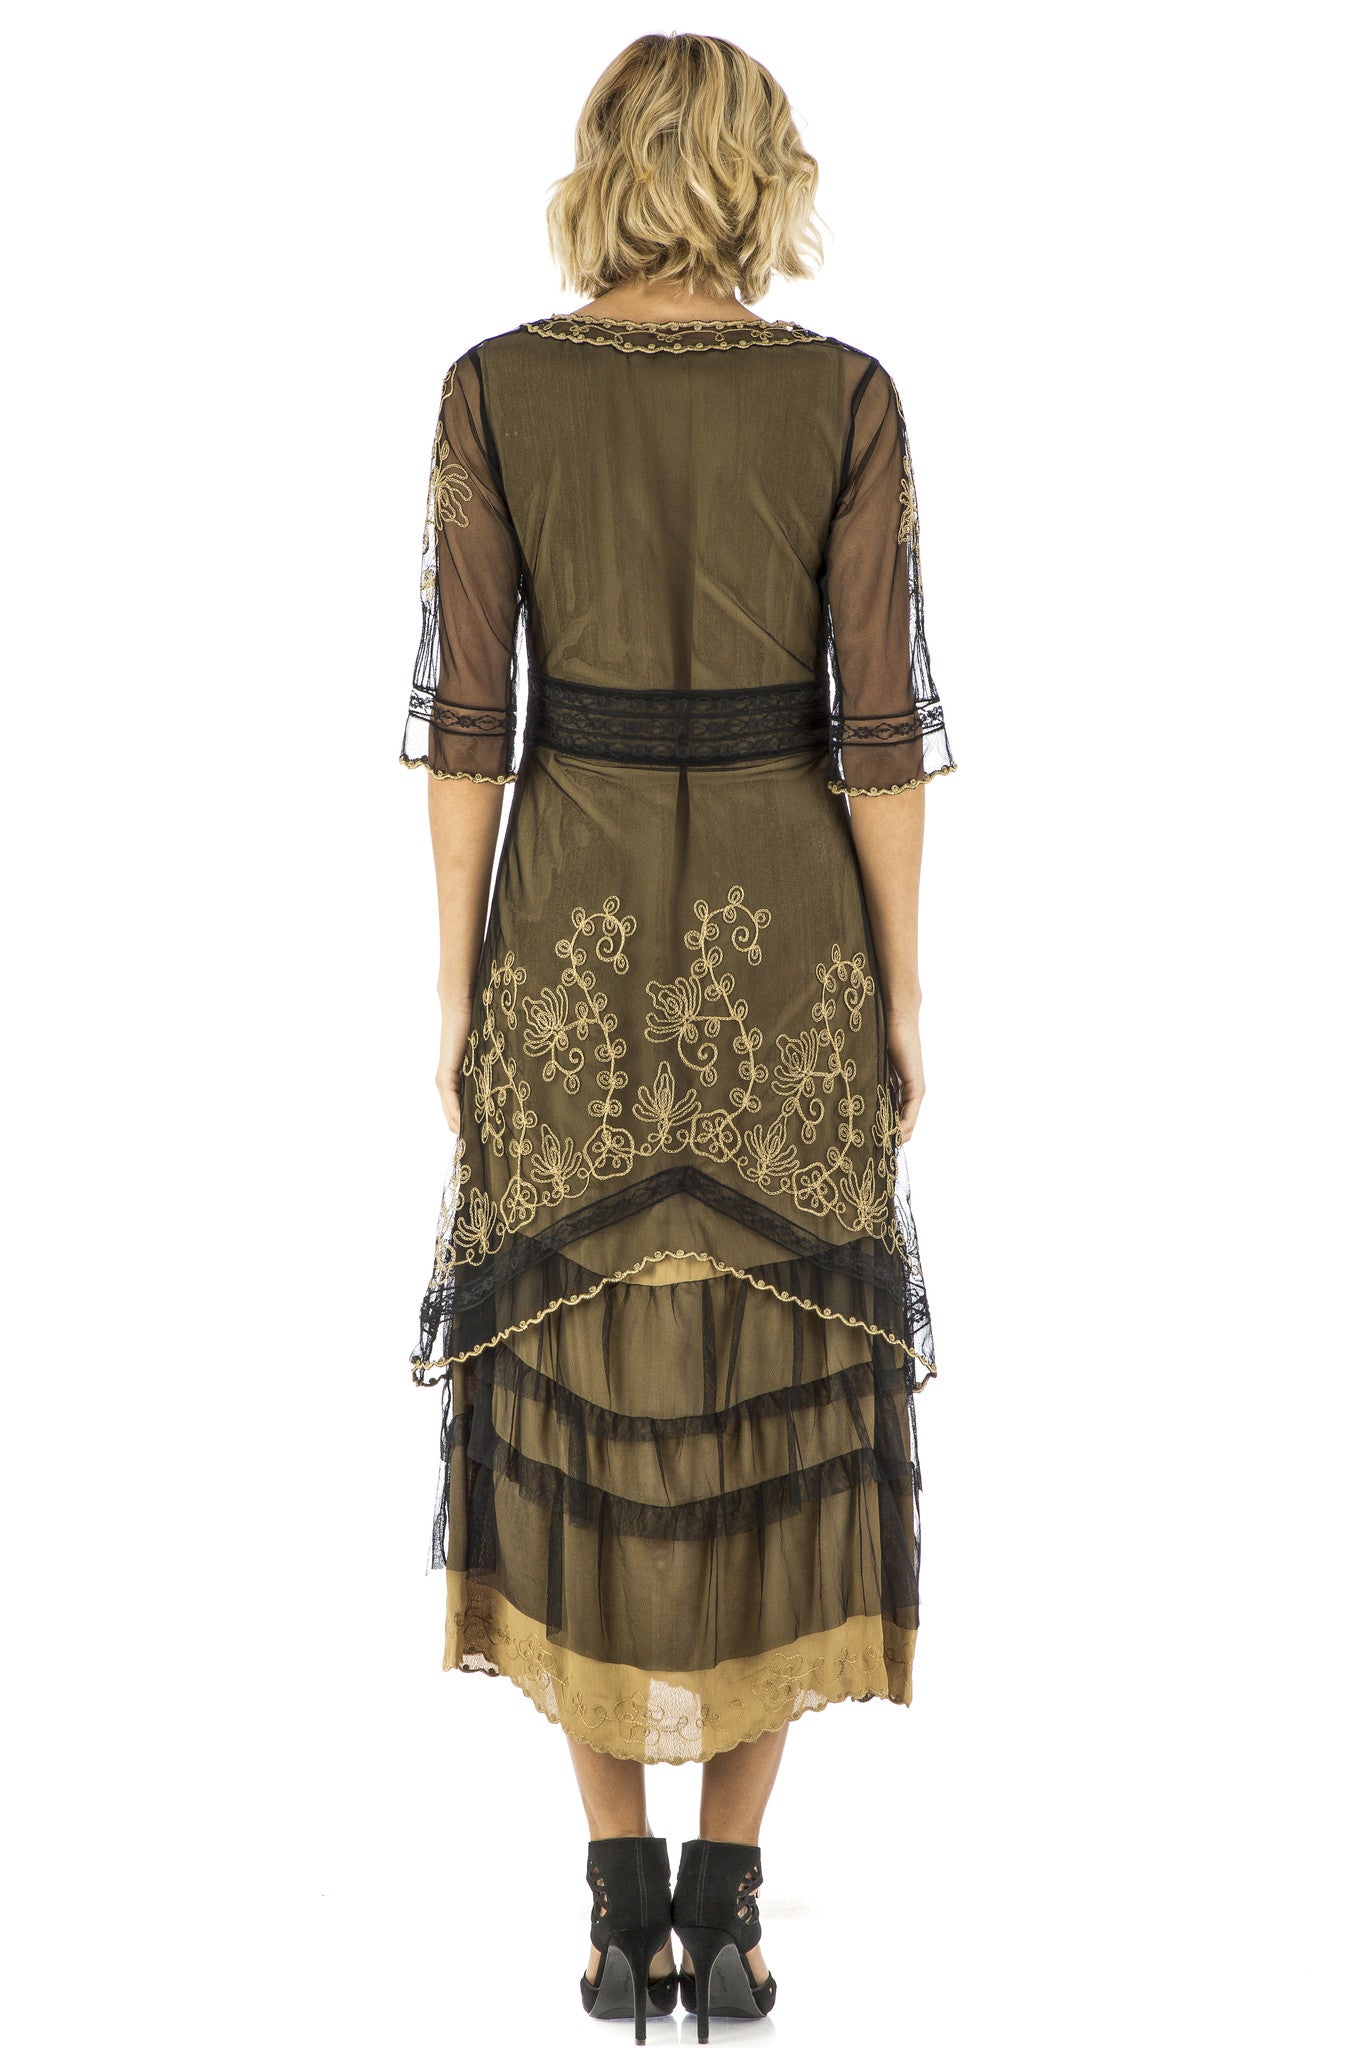 Nataya Victorian Lux Lace 2101 Black/Gold Dress - SOLD OUT